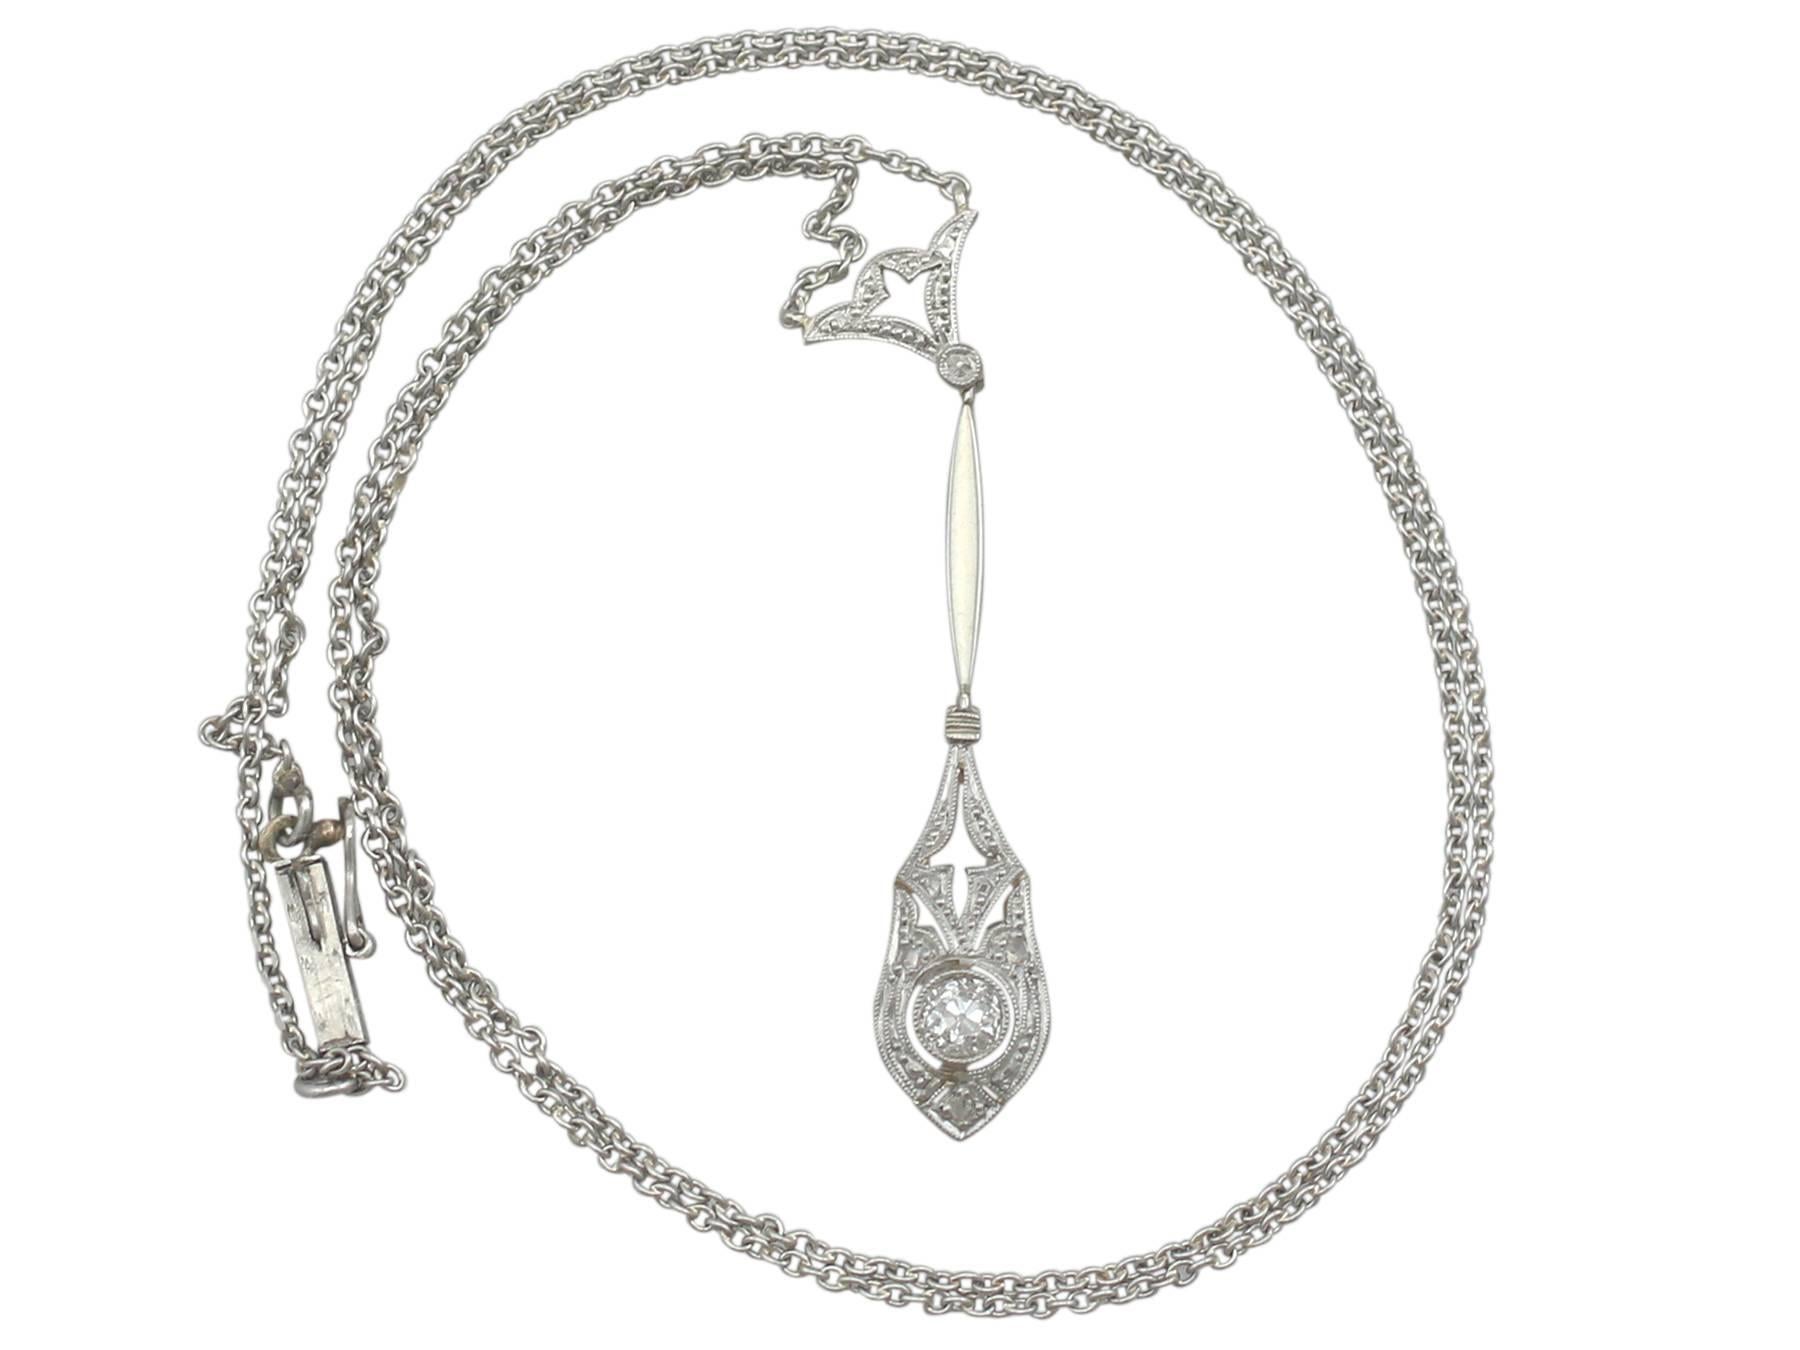 A fine and impressive 0.19 carat diamond and 14k yellow gold, 14kwhite gold set necklace with platinum chain; part of our diverse antique jewellery collections.

This fine and impressive antique diamond drop necklace has been crafted in 14k yellow